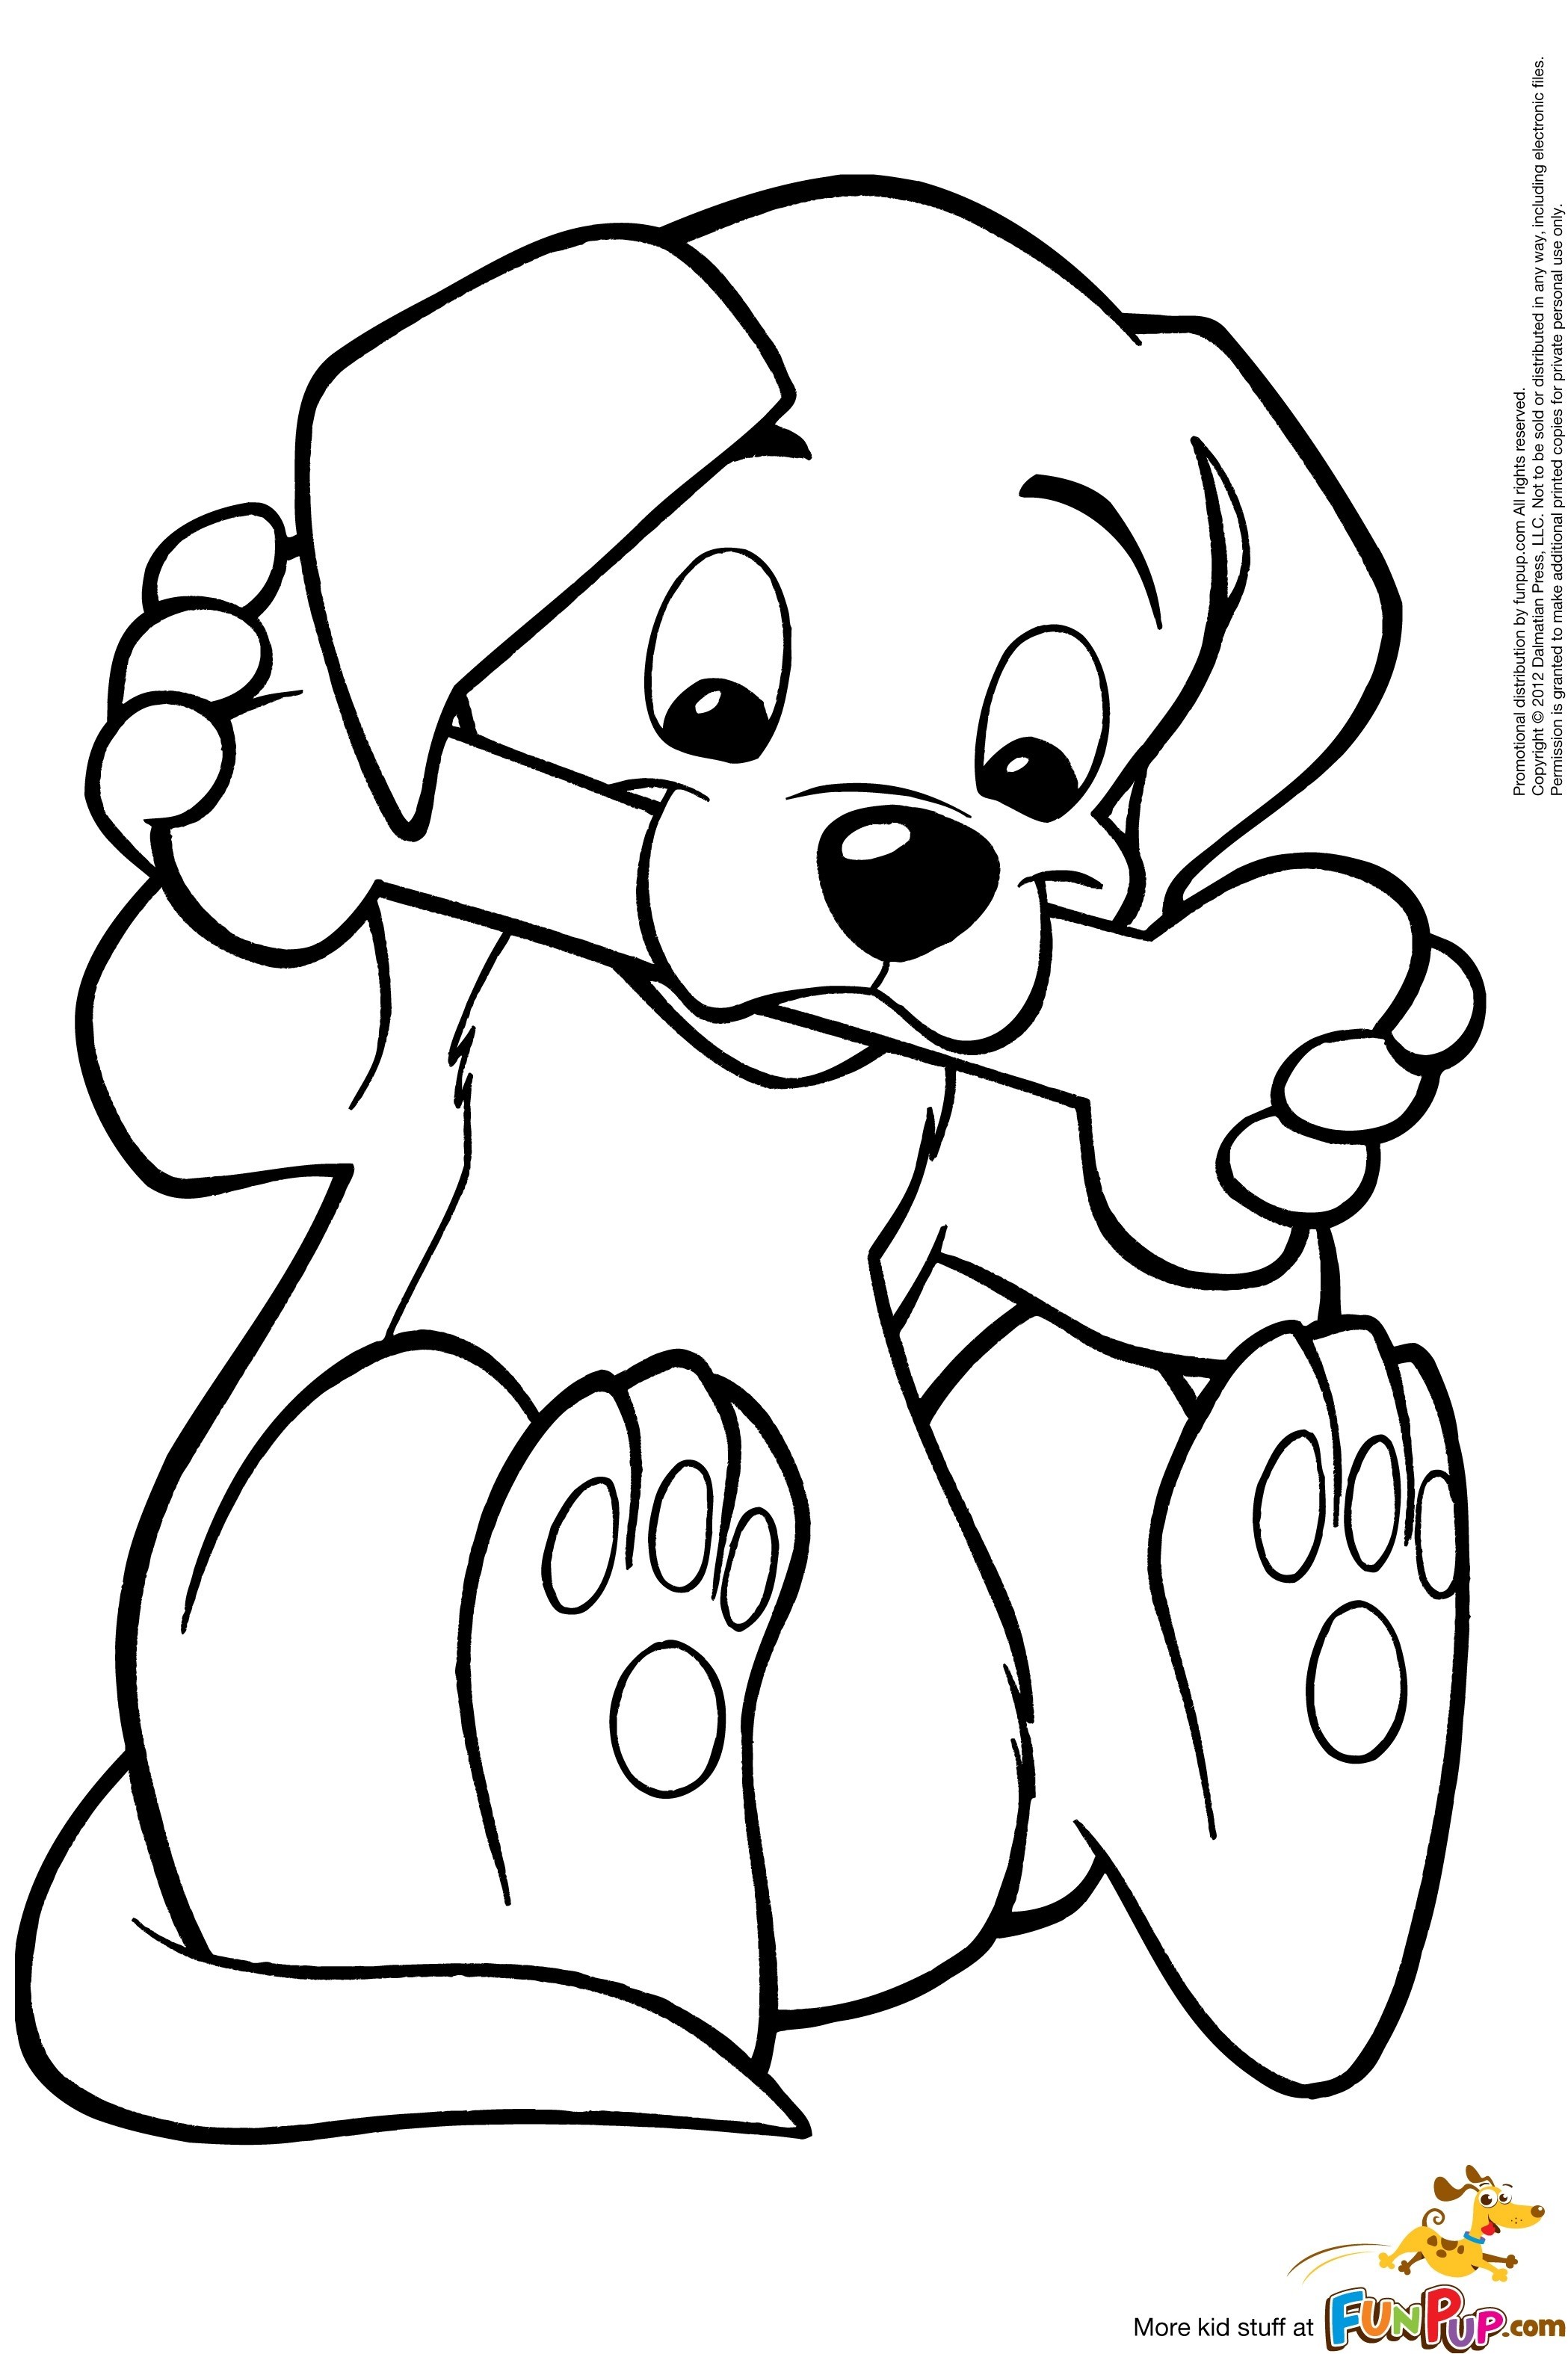 Pomeranian Puppy Coloring Pages at GetColorings.com | Free ...